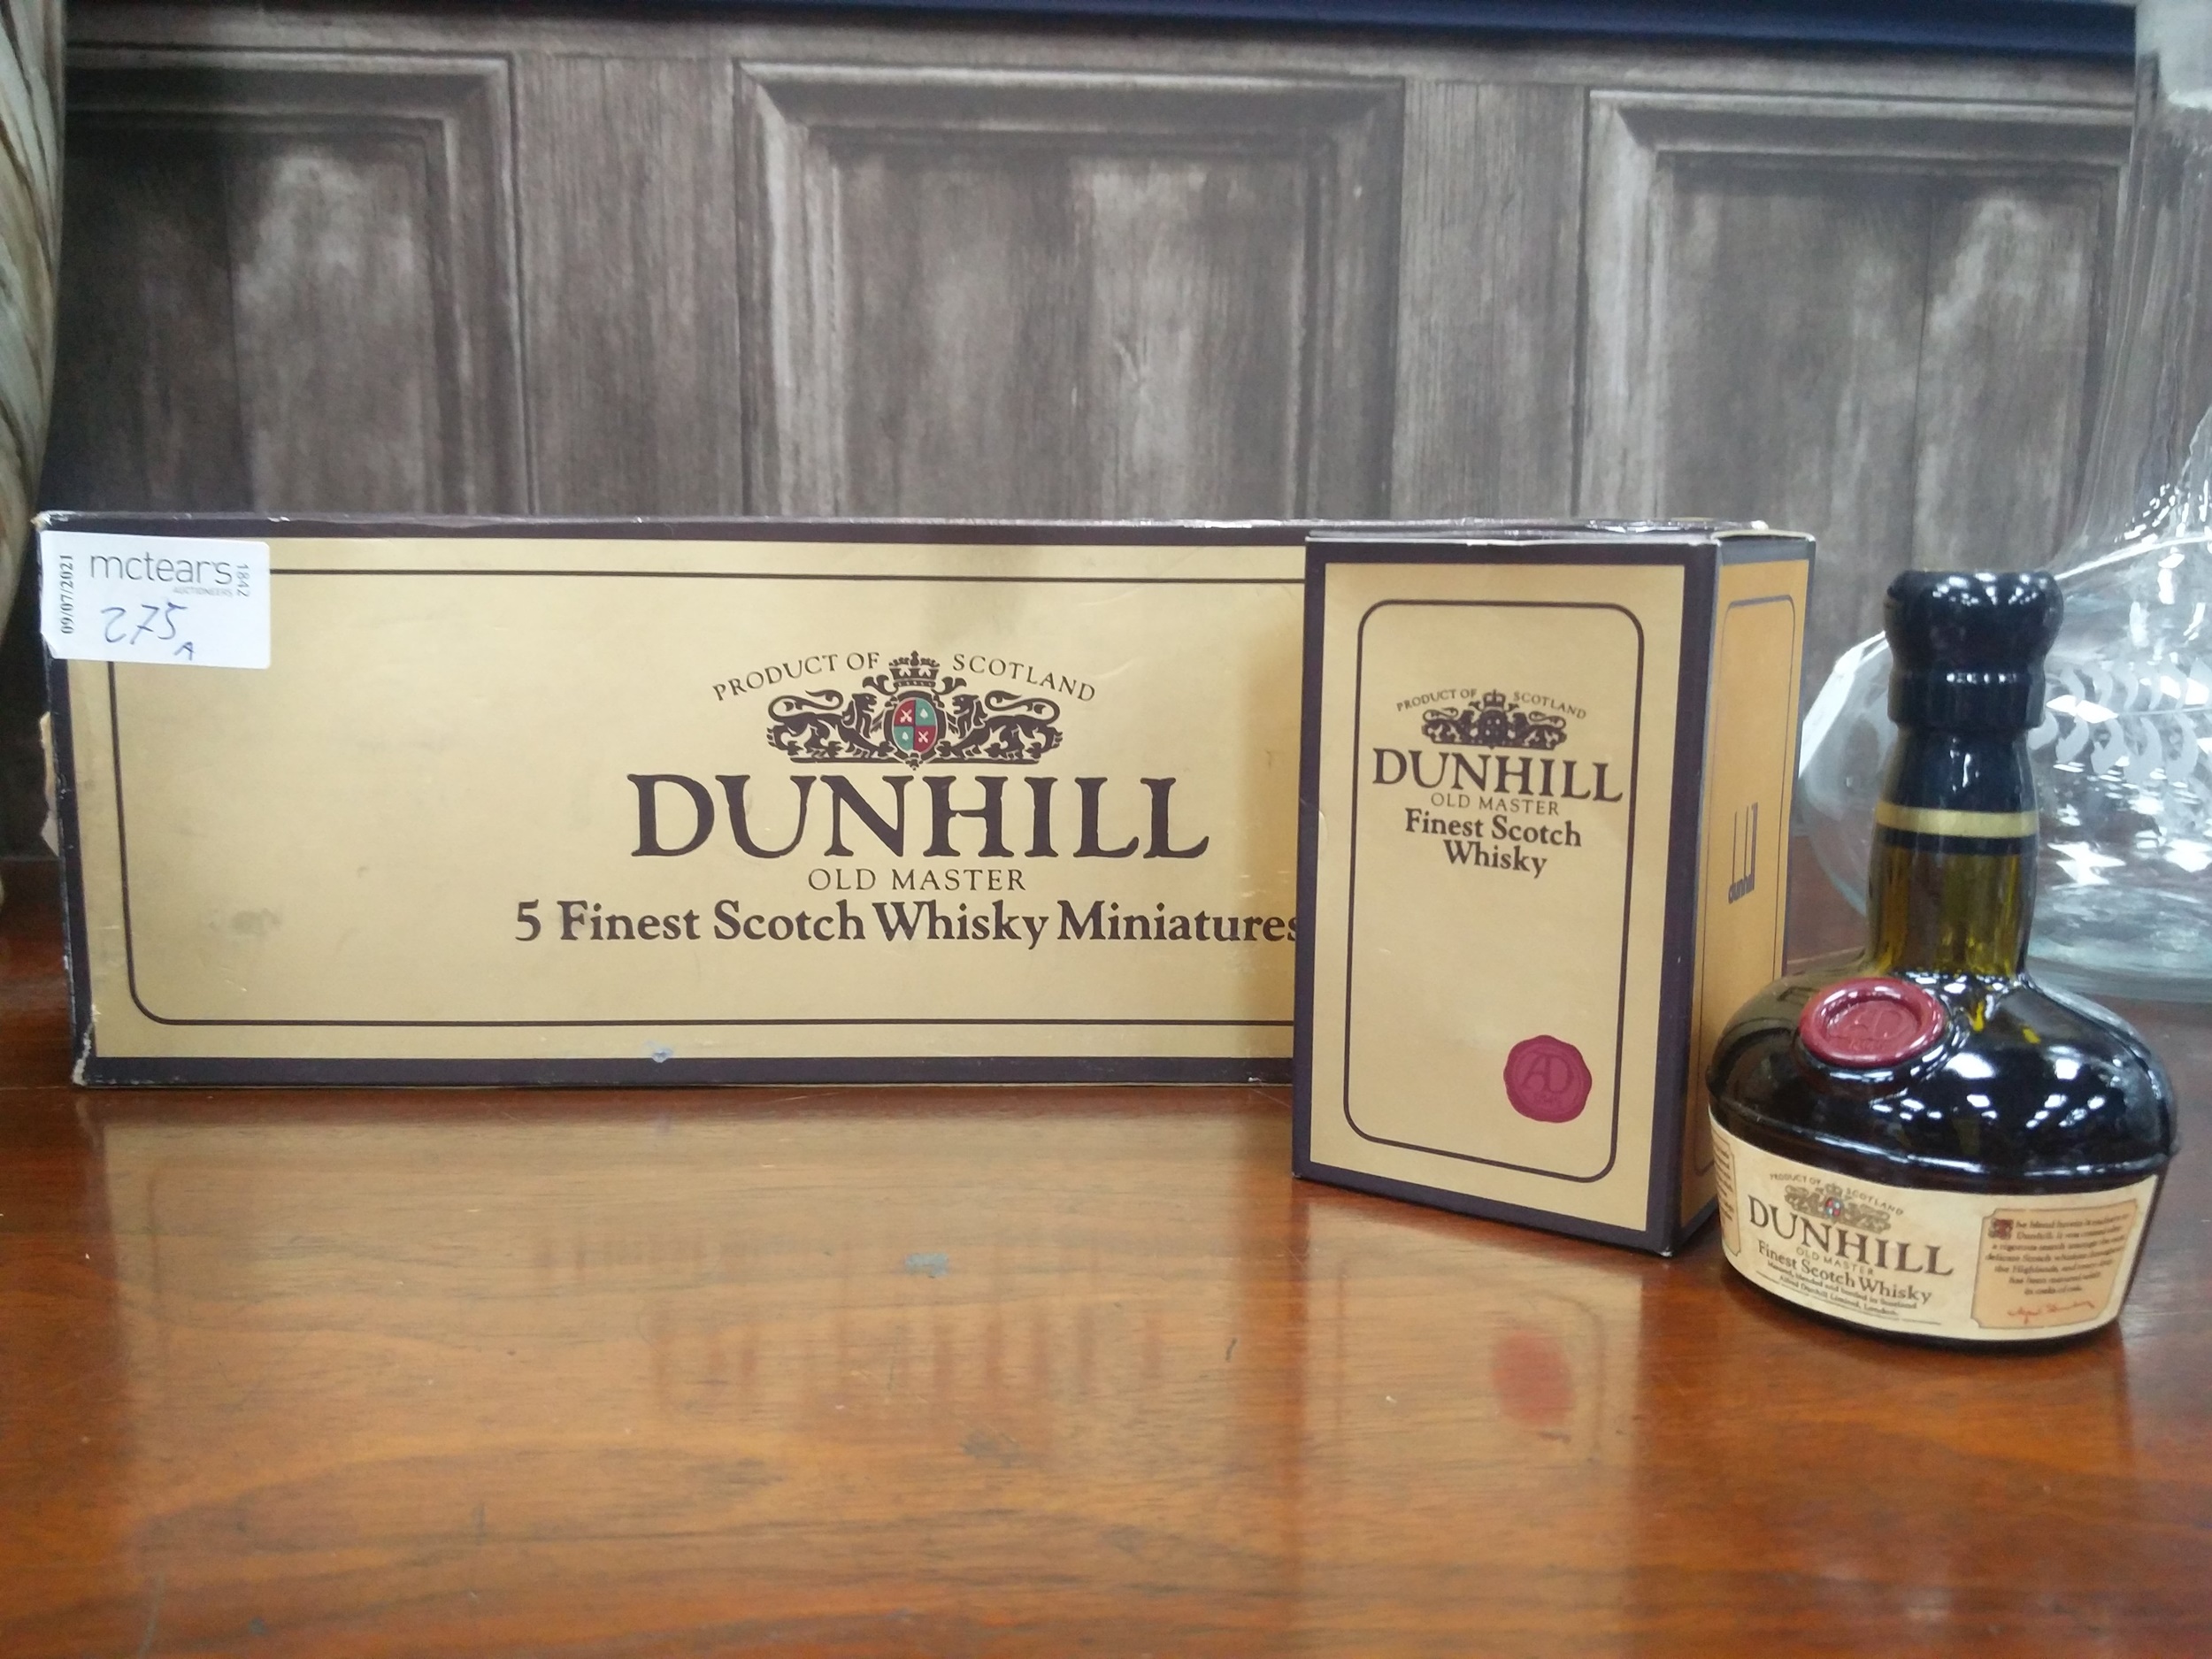 DUNHILL OLD MASTER 5 FINEST SCOTCH WHISKY MINIATURES